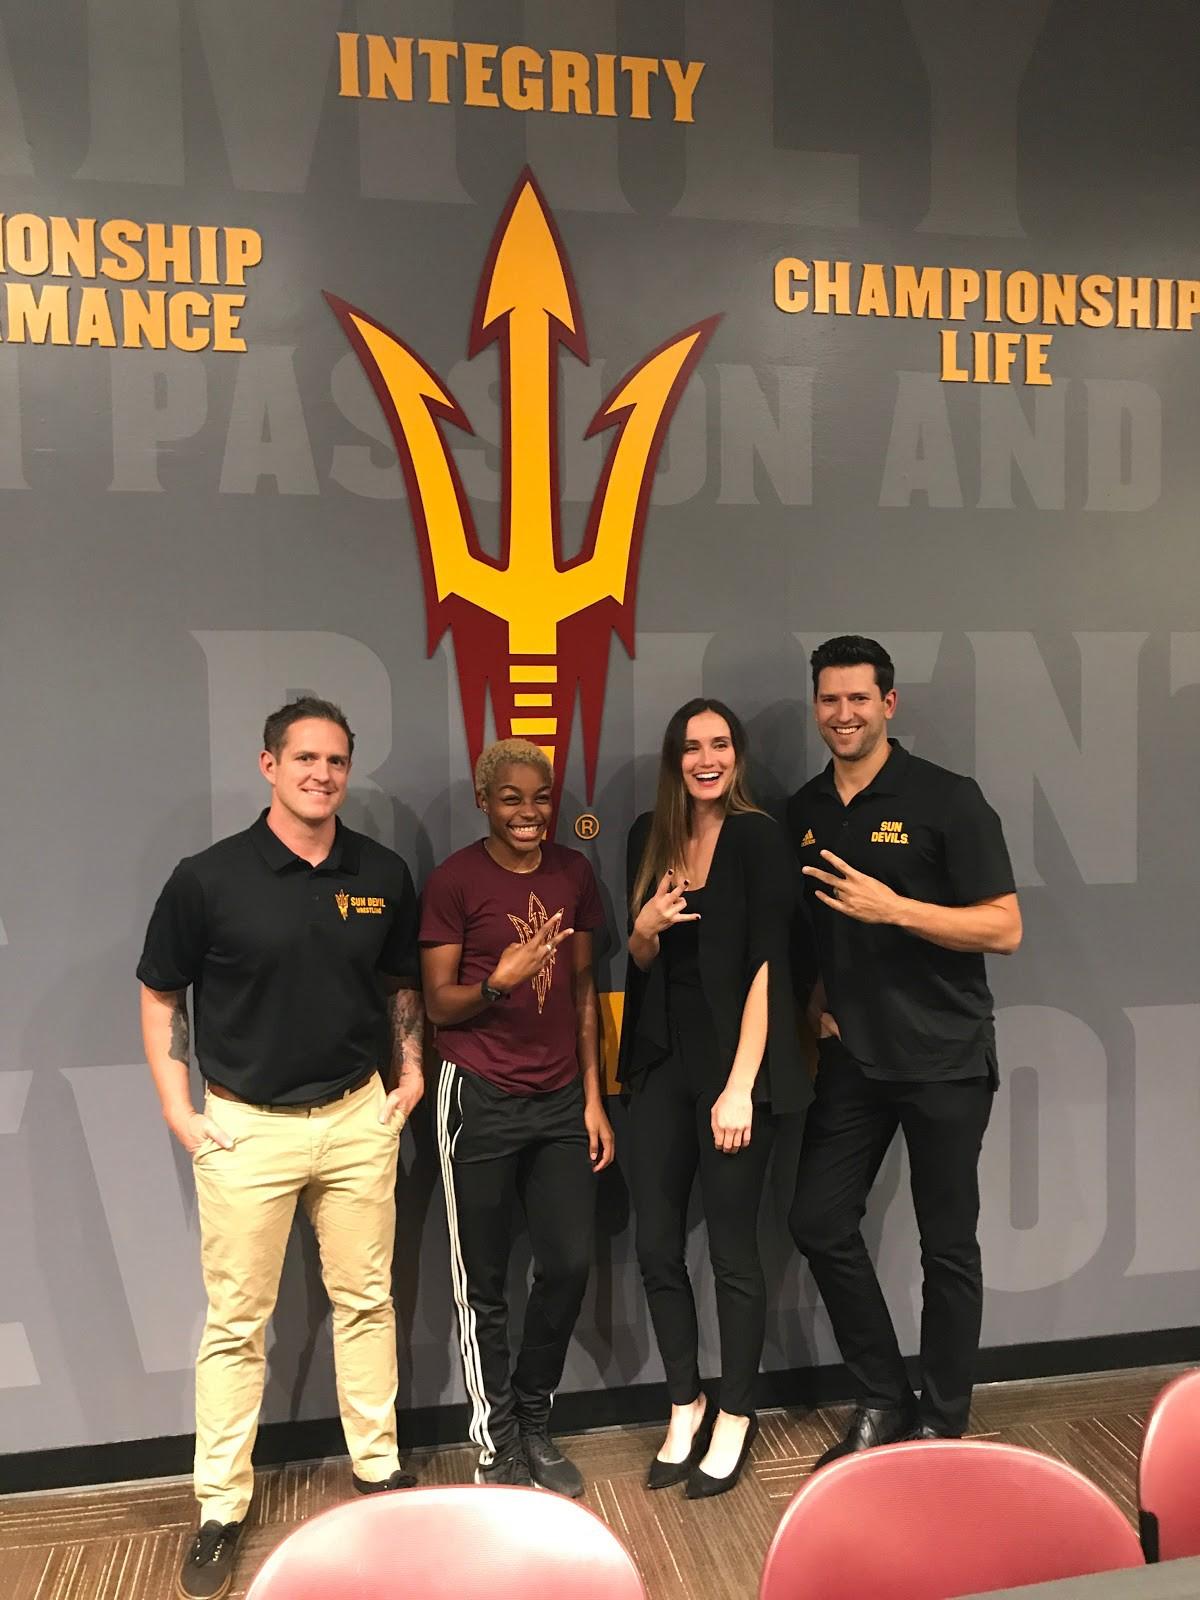 Roman Rozell, Jeminise Parris, Brittany Martin, and Jeff Kunowski posing with sun devil forks up